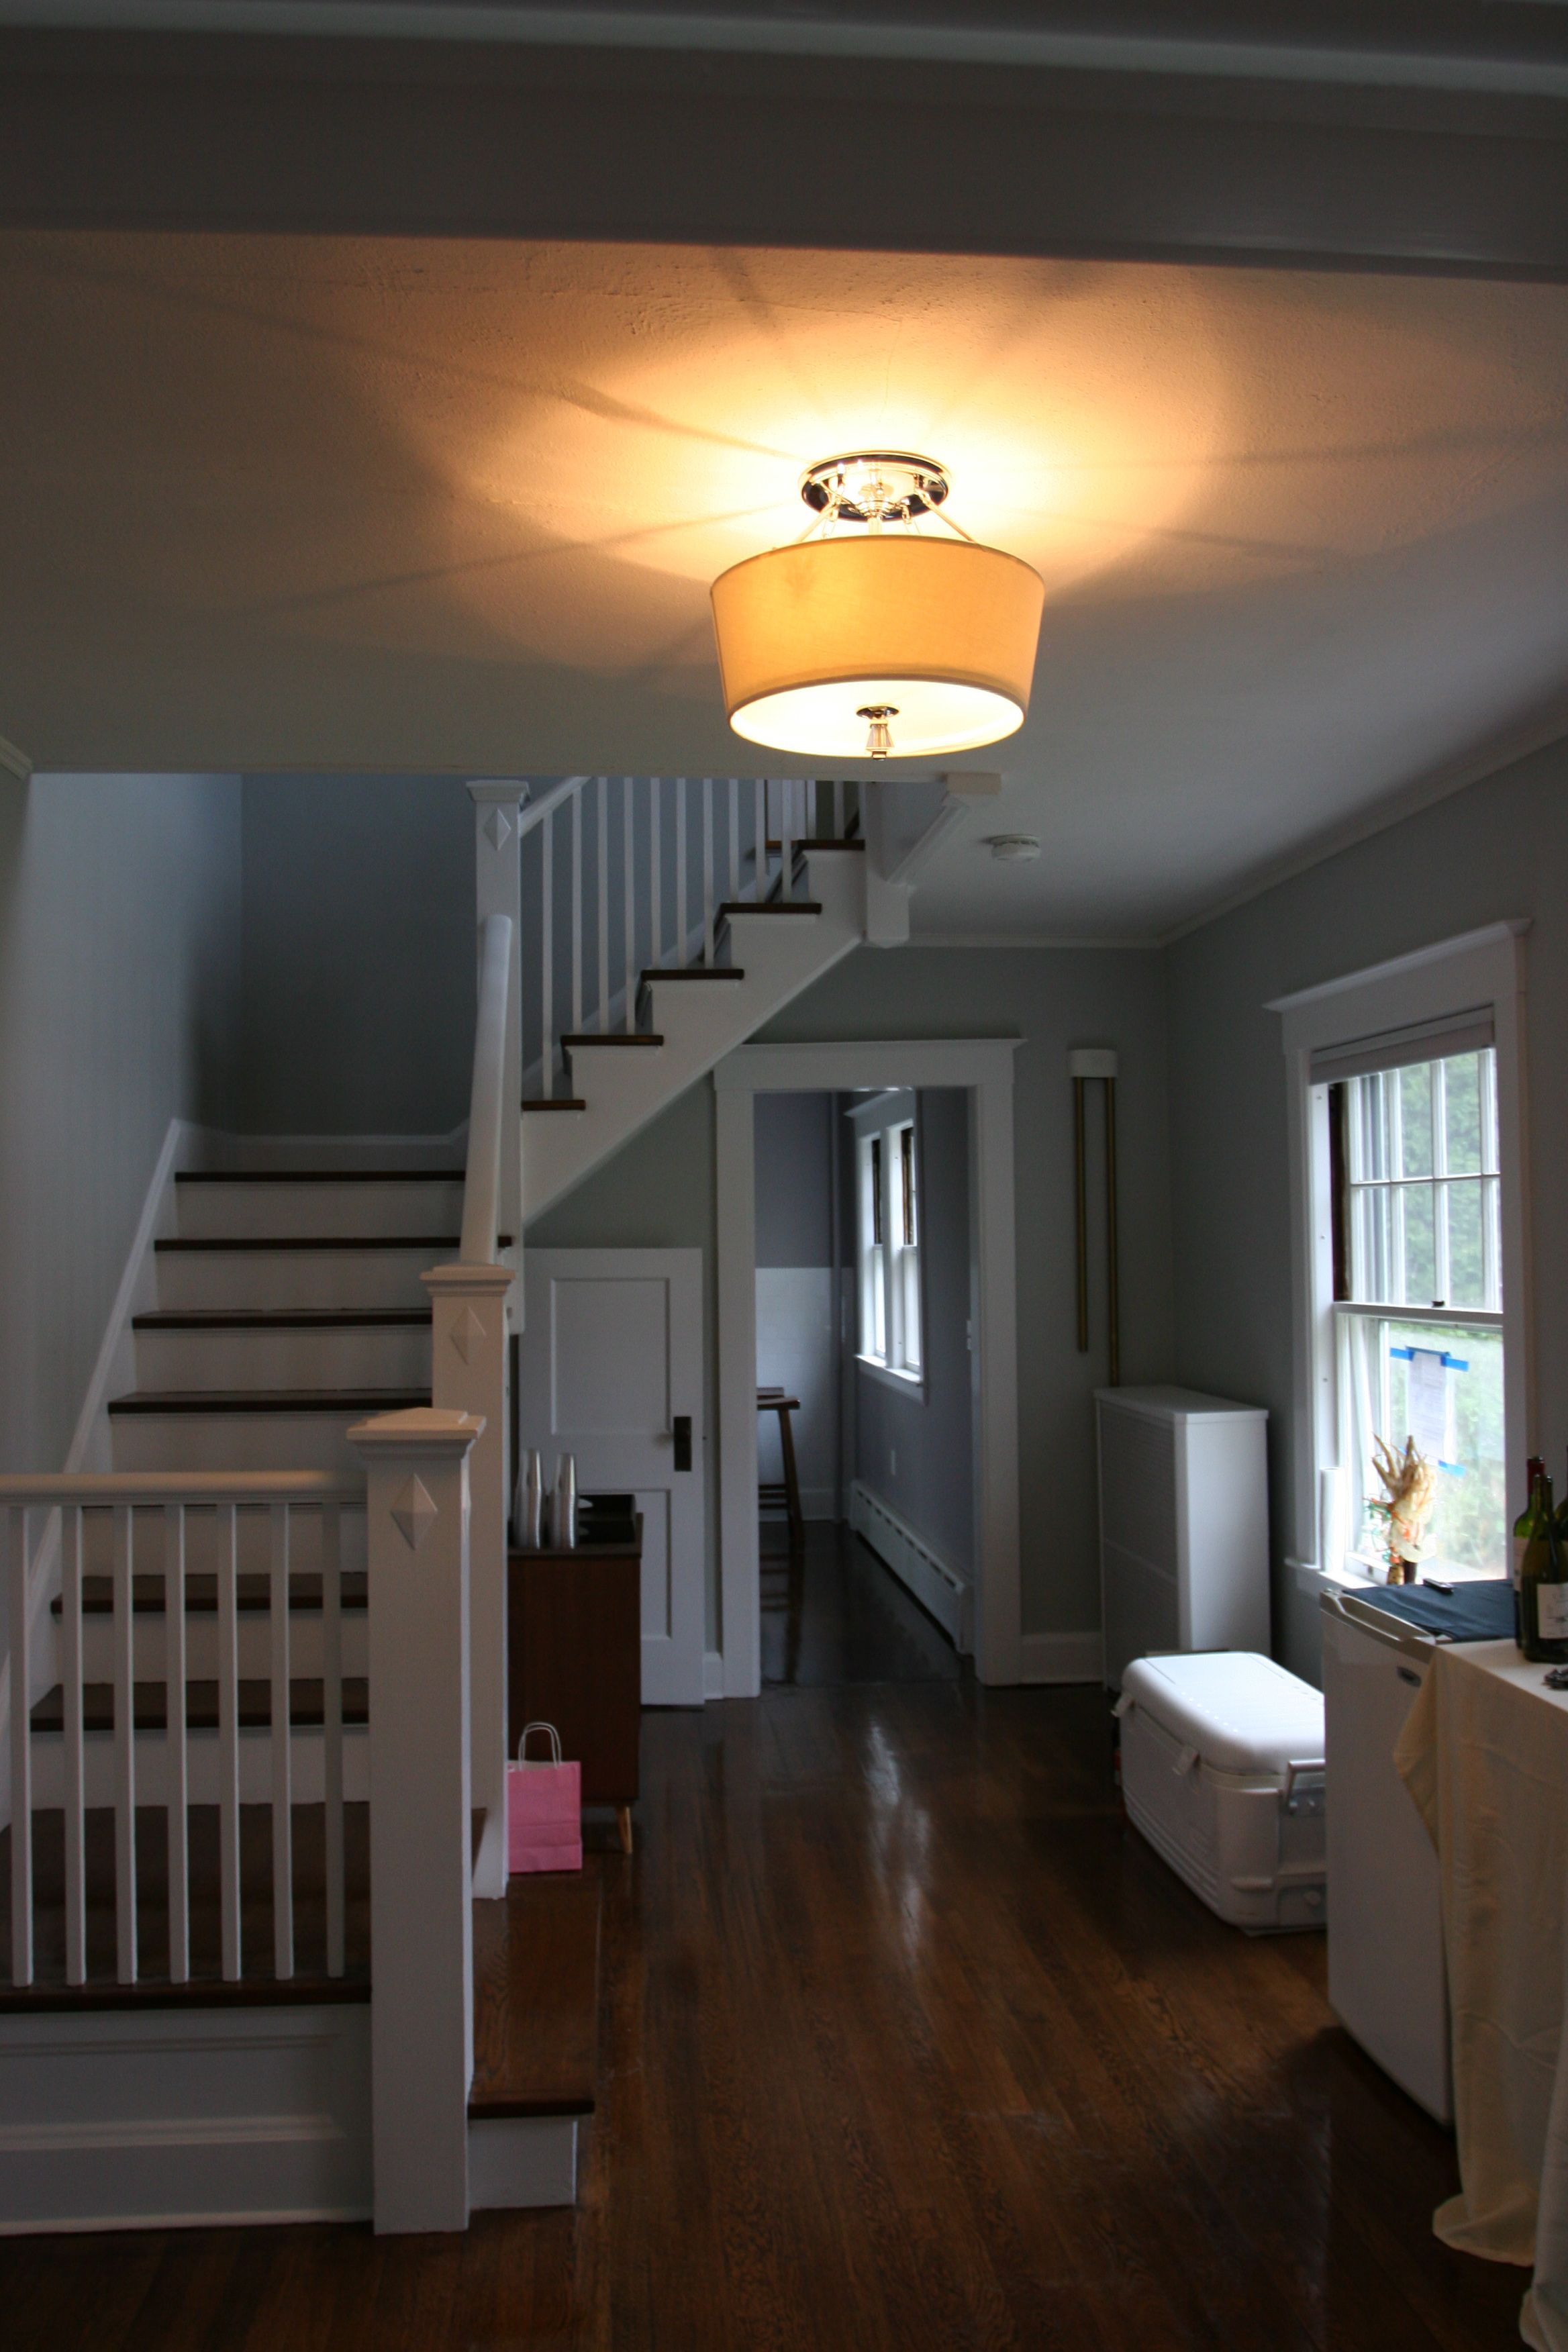 Our new front hall light. Trim paint, floors, wall color, door paint, electric. It's pretty much brand new again.